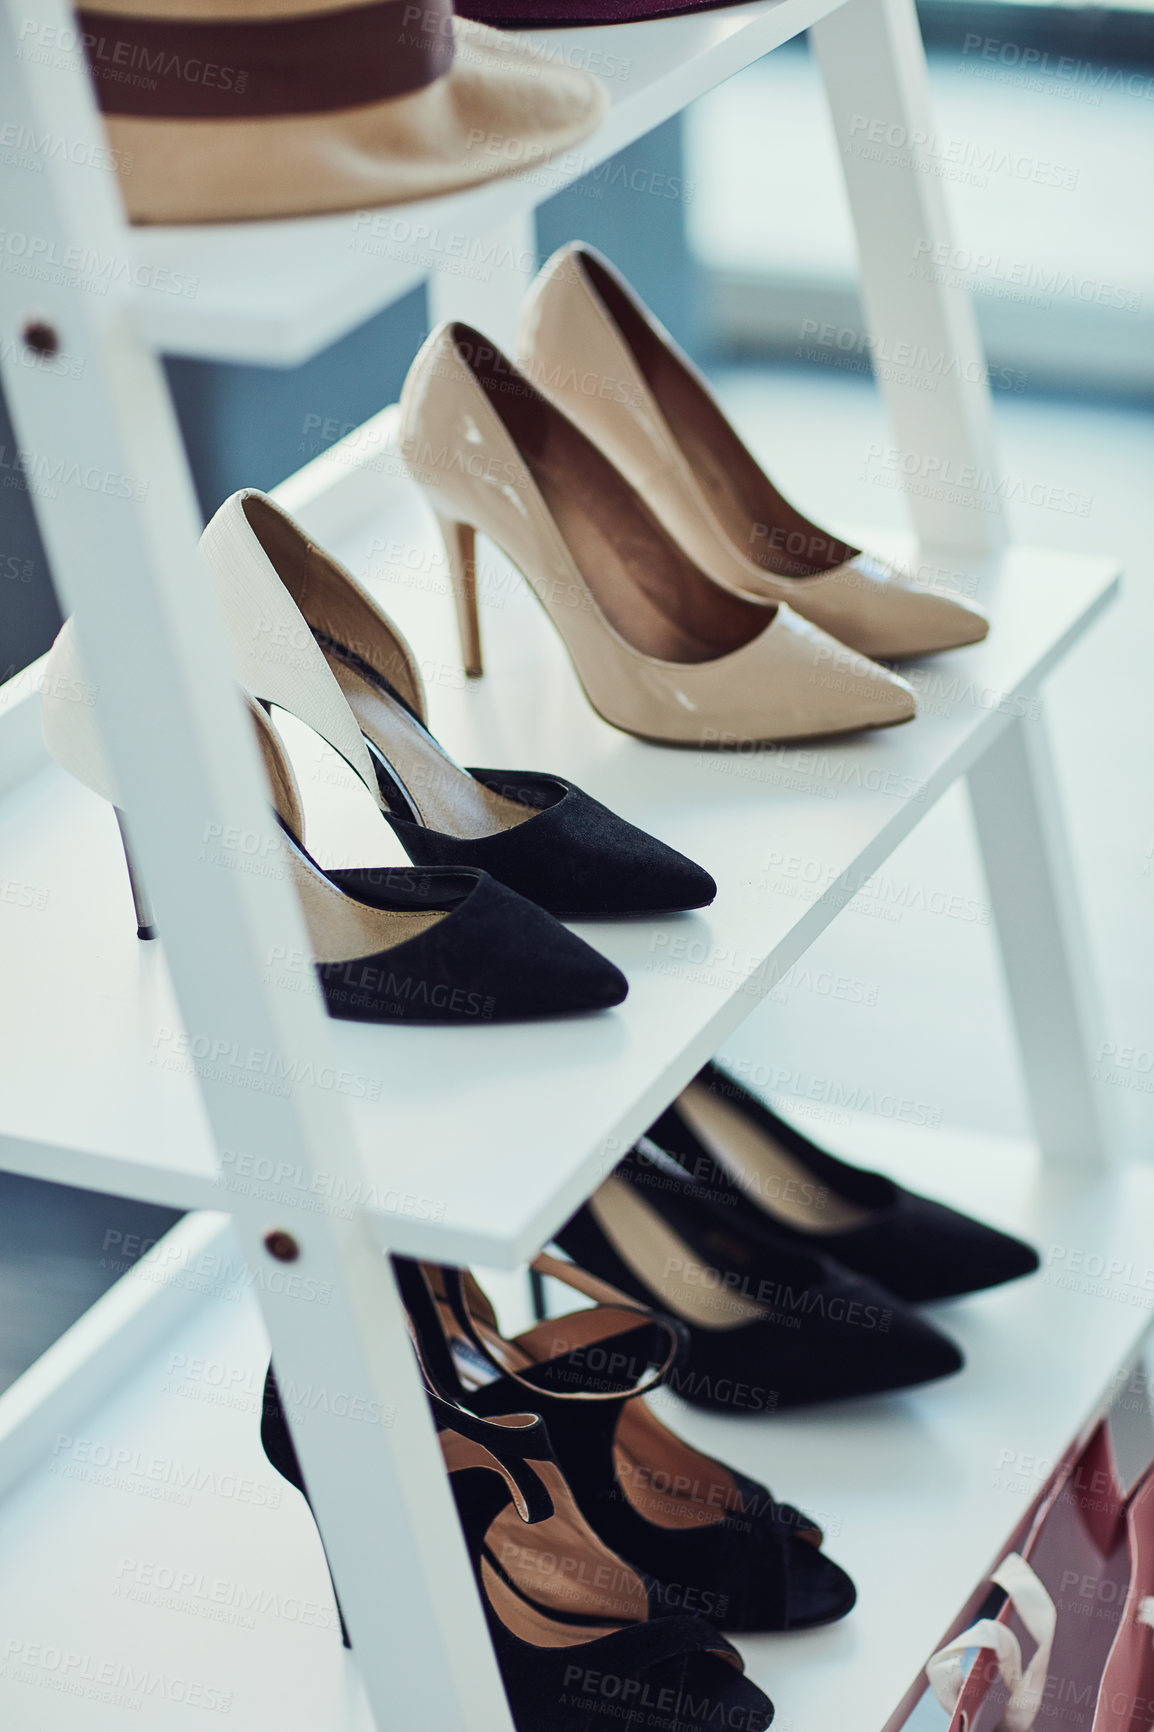 Buy stock photo Shot of high heels on display in a store